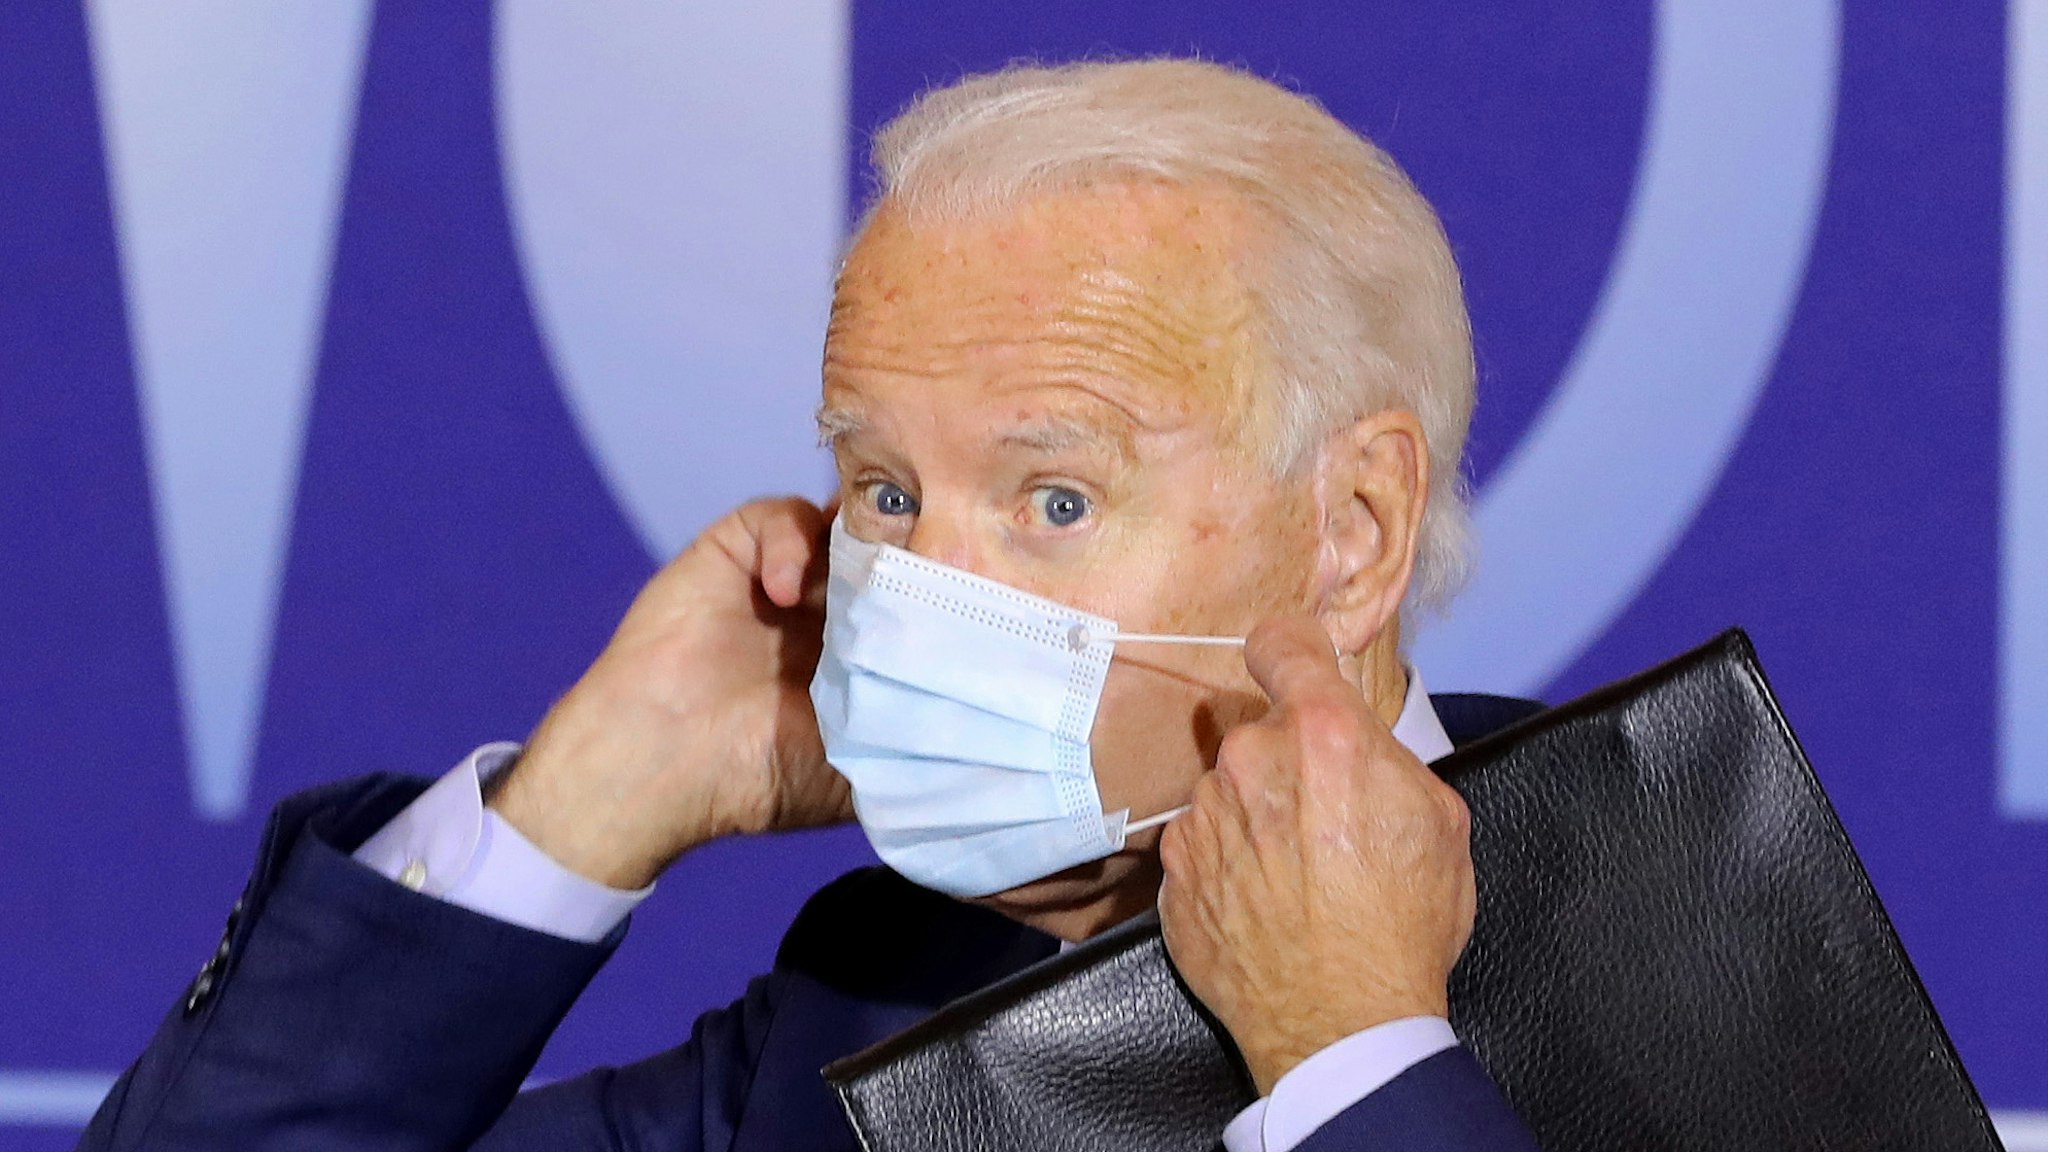 CINCINNATI, OH - OCTOBER 12: Democratic presidential nominee Joe Biden replaces his face mask after delivering remarks during a voter-mobilization event at the Cincinnati Museum Center at Union Terminal October 12, 2020 in Cincinnati, Ohio. With 21 days until the election, Biden is campaigning in Toledo and Cincinnati.